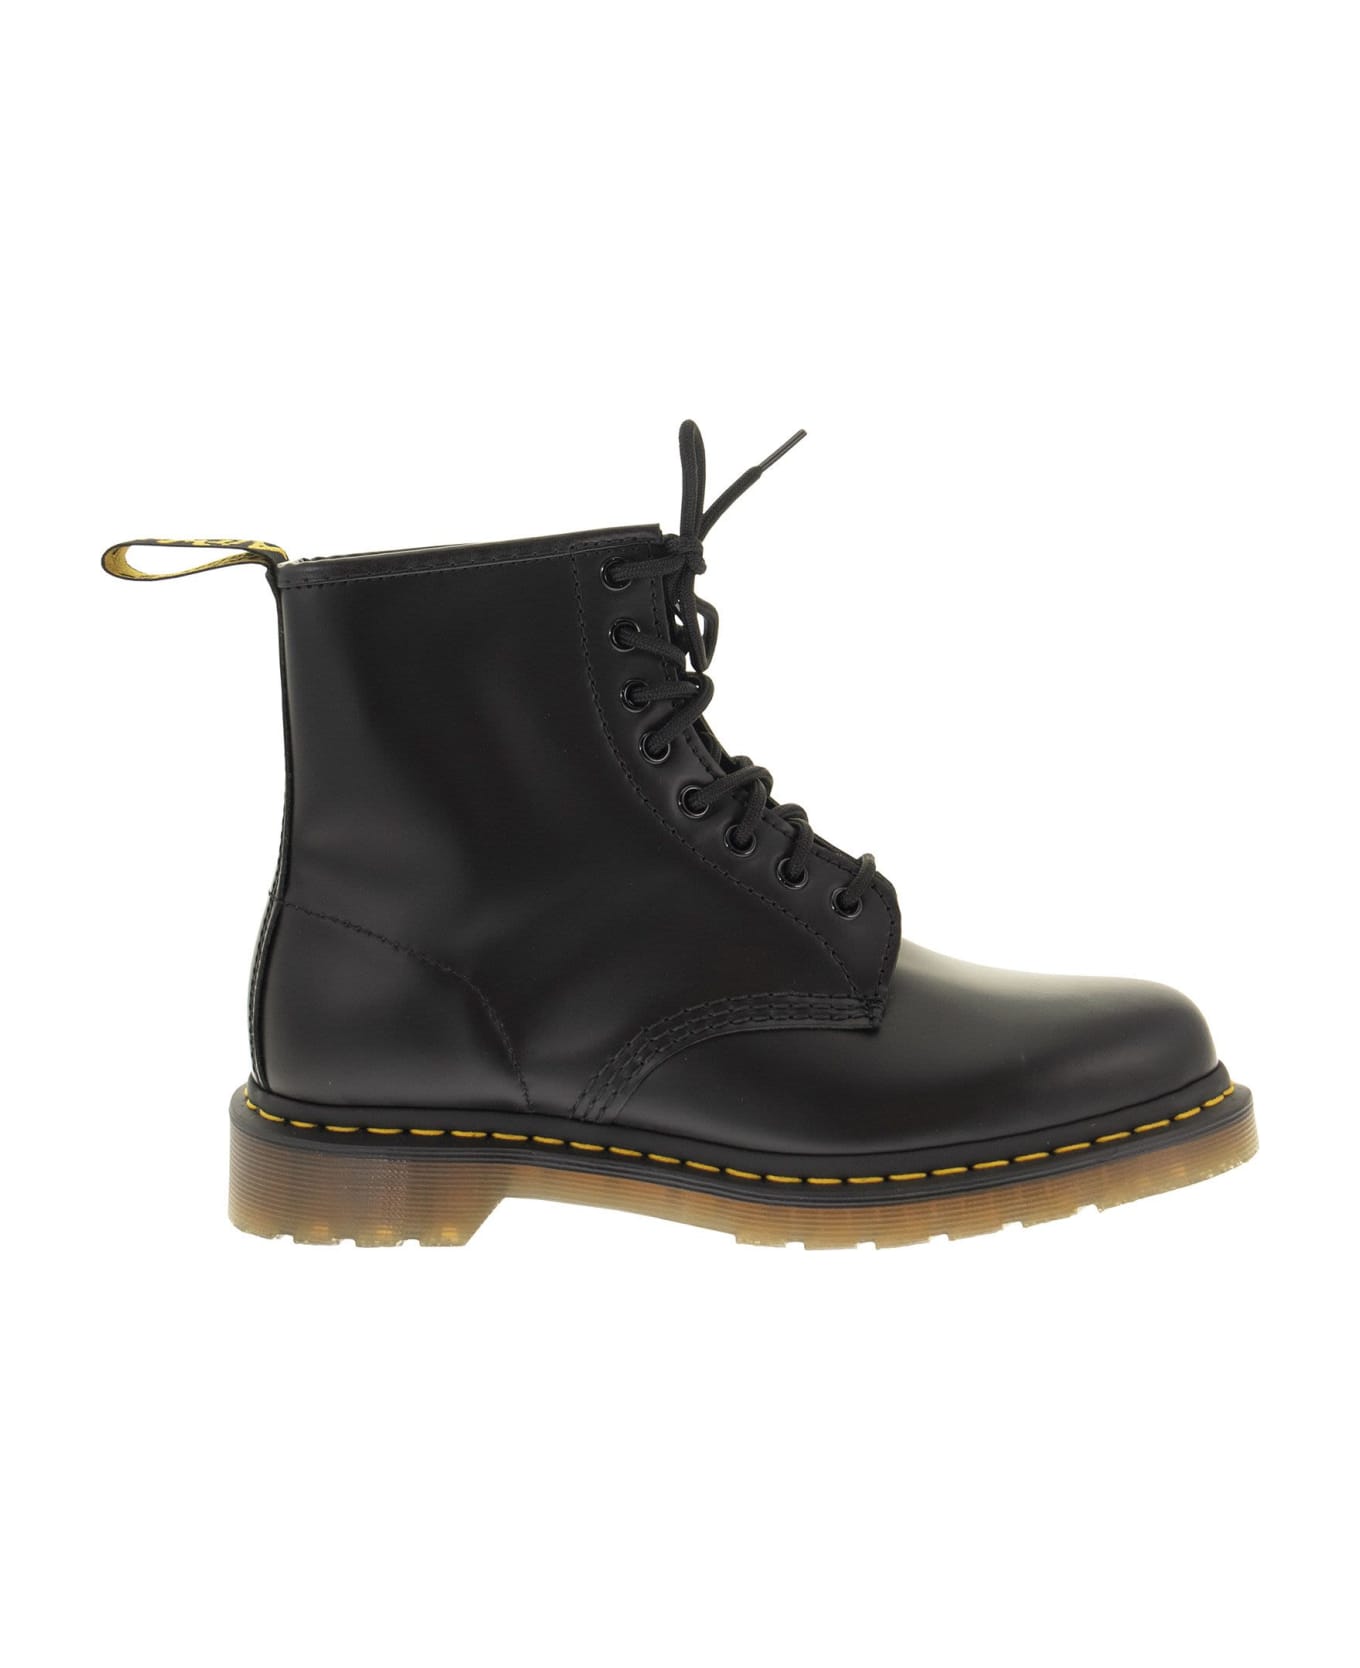 Dr. Martens 1460 Smooth Leather Combat Boots - Black シューズ